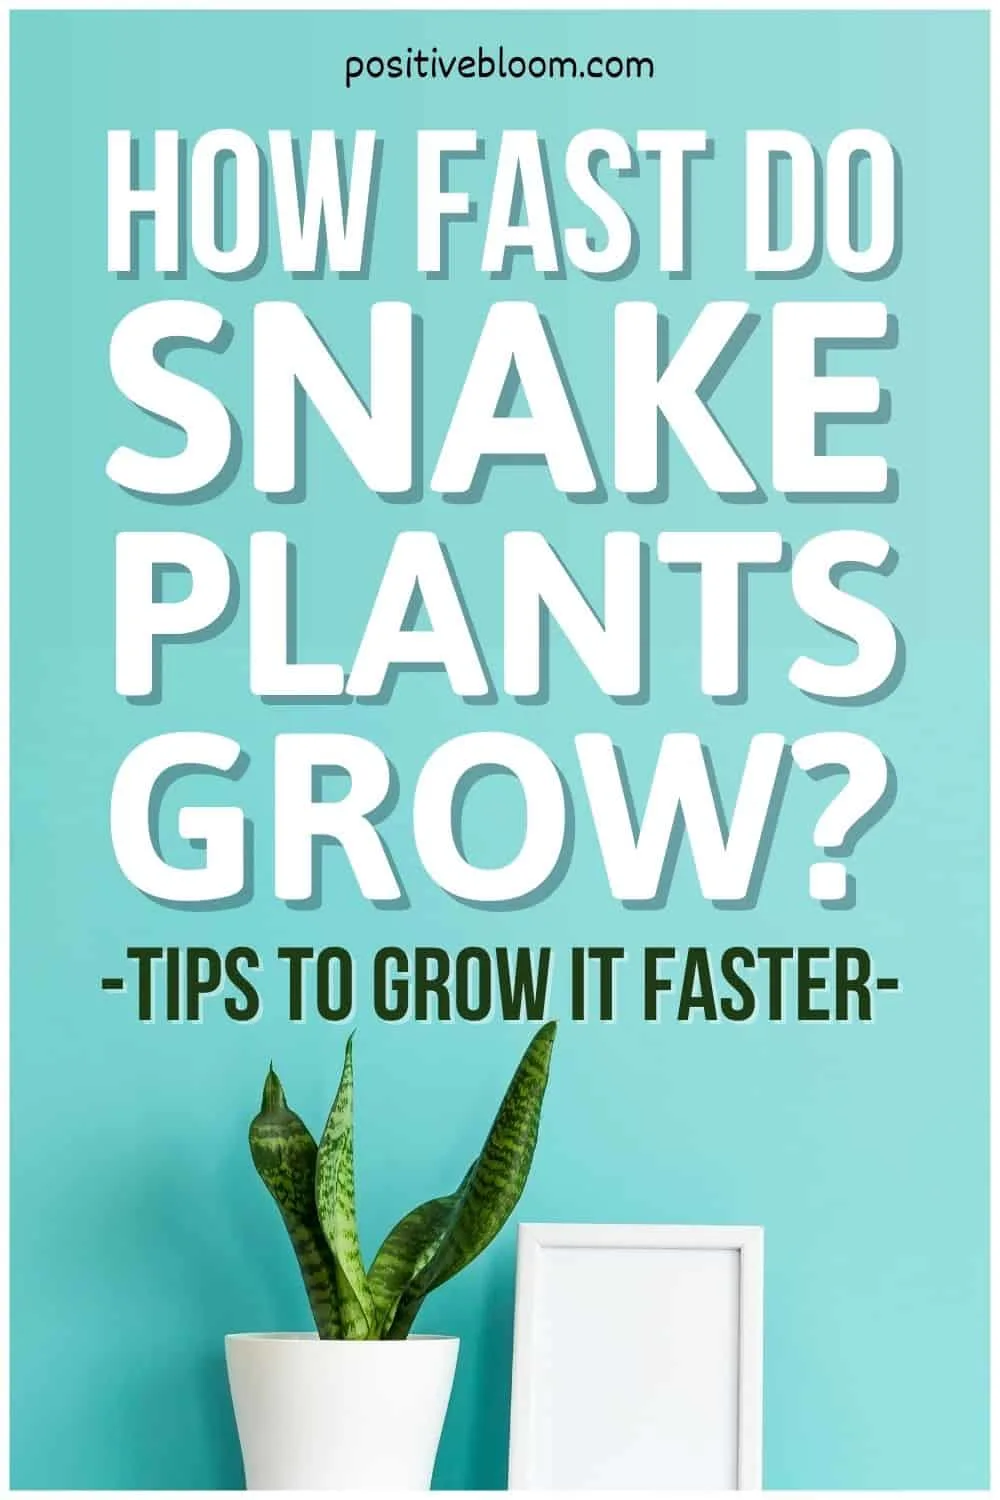 How Fast Do Snake Plants Grow (Tips To Grow It Faster)